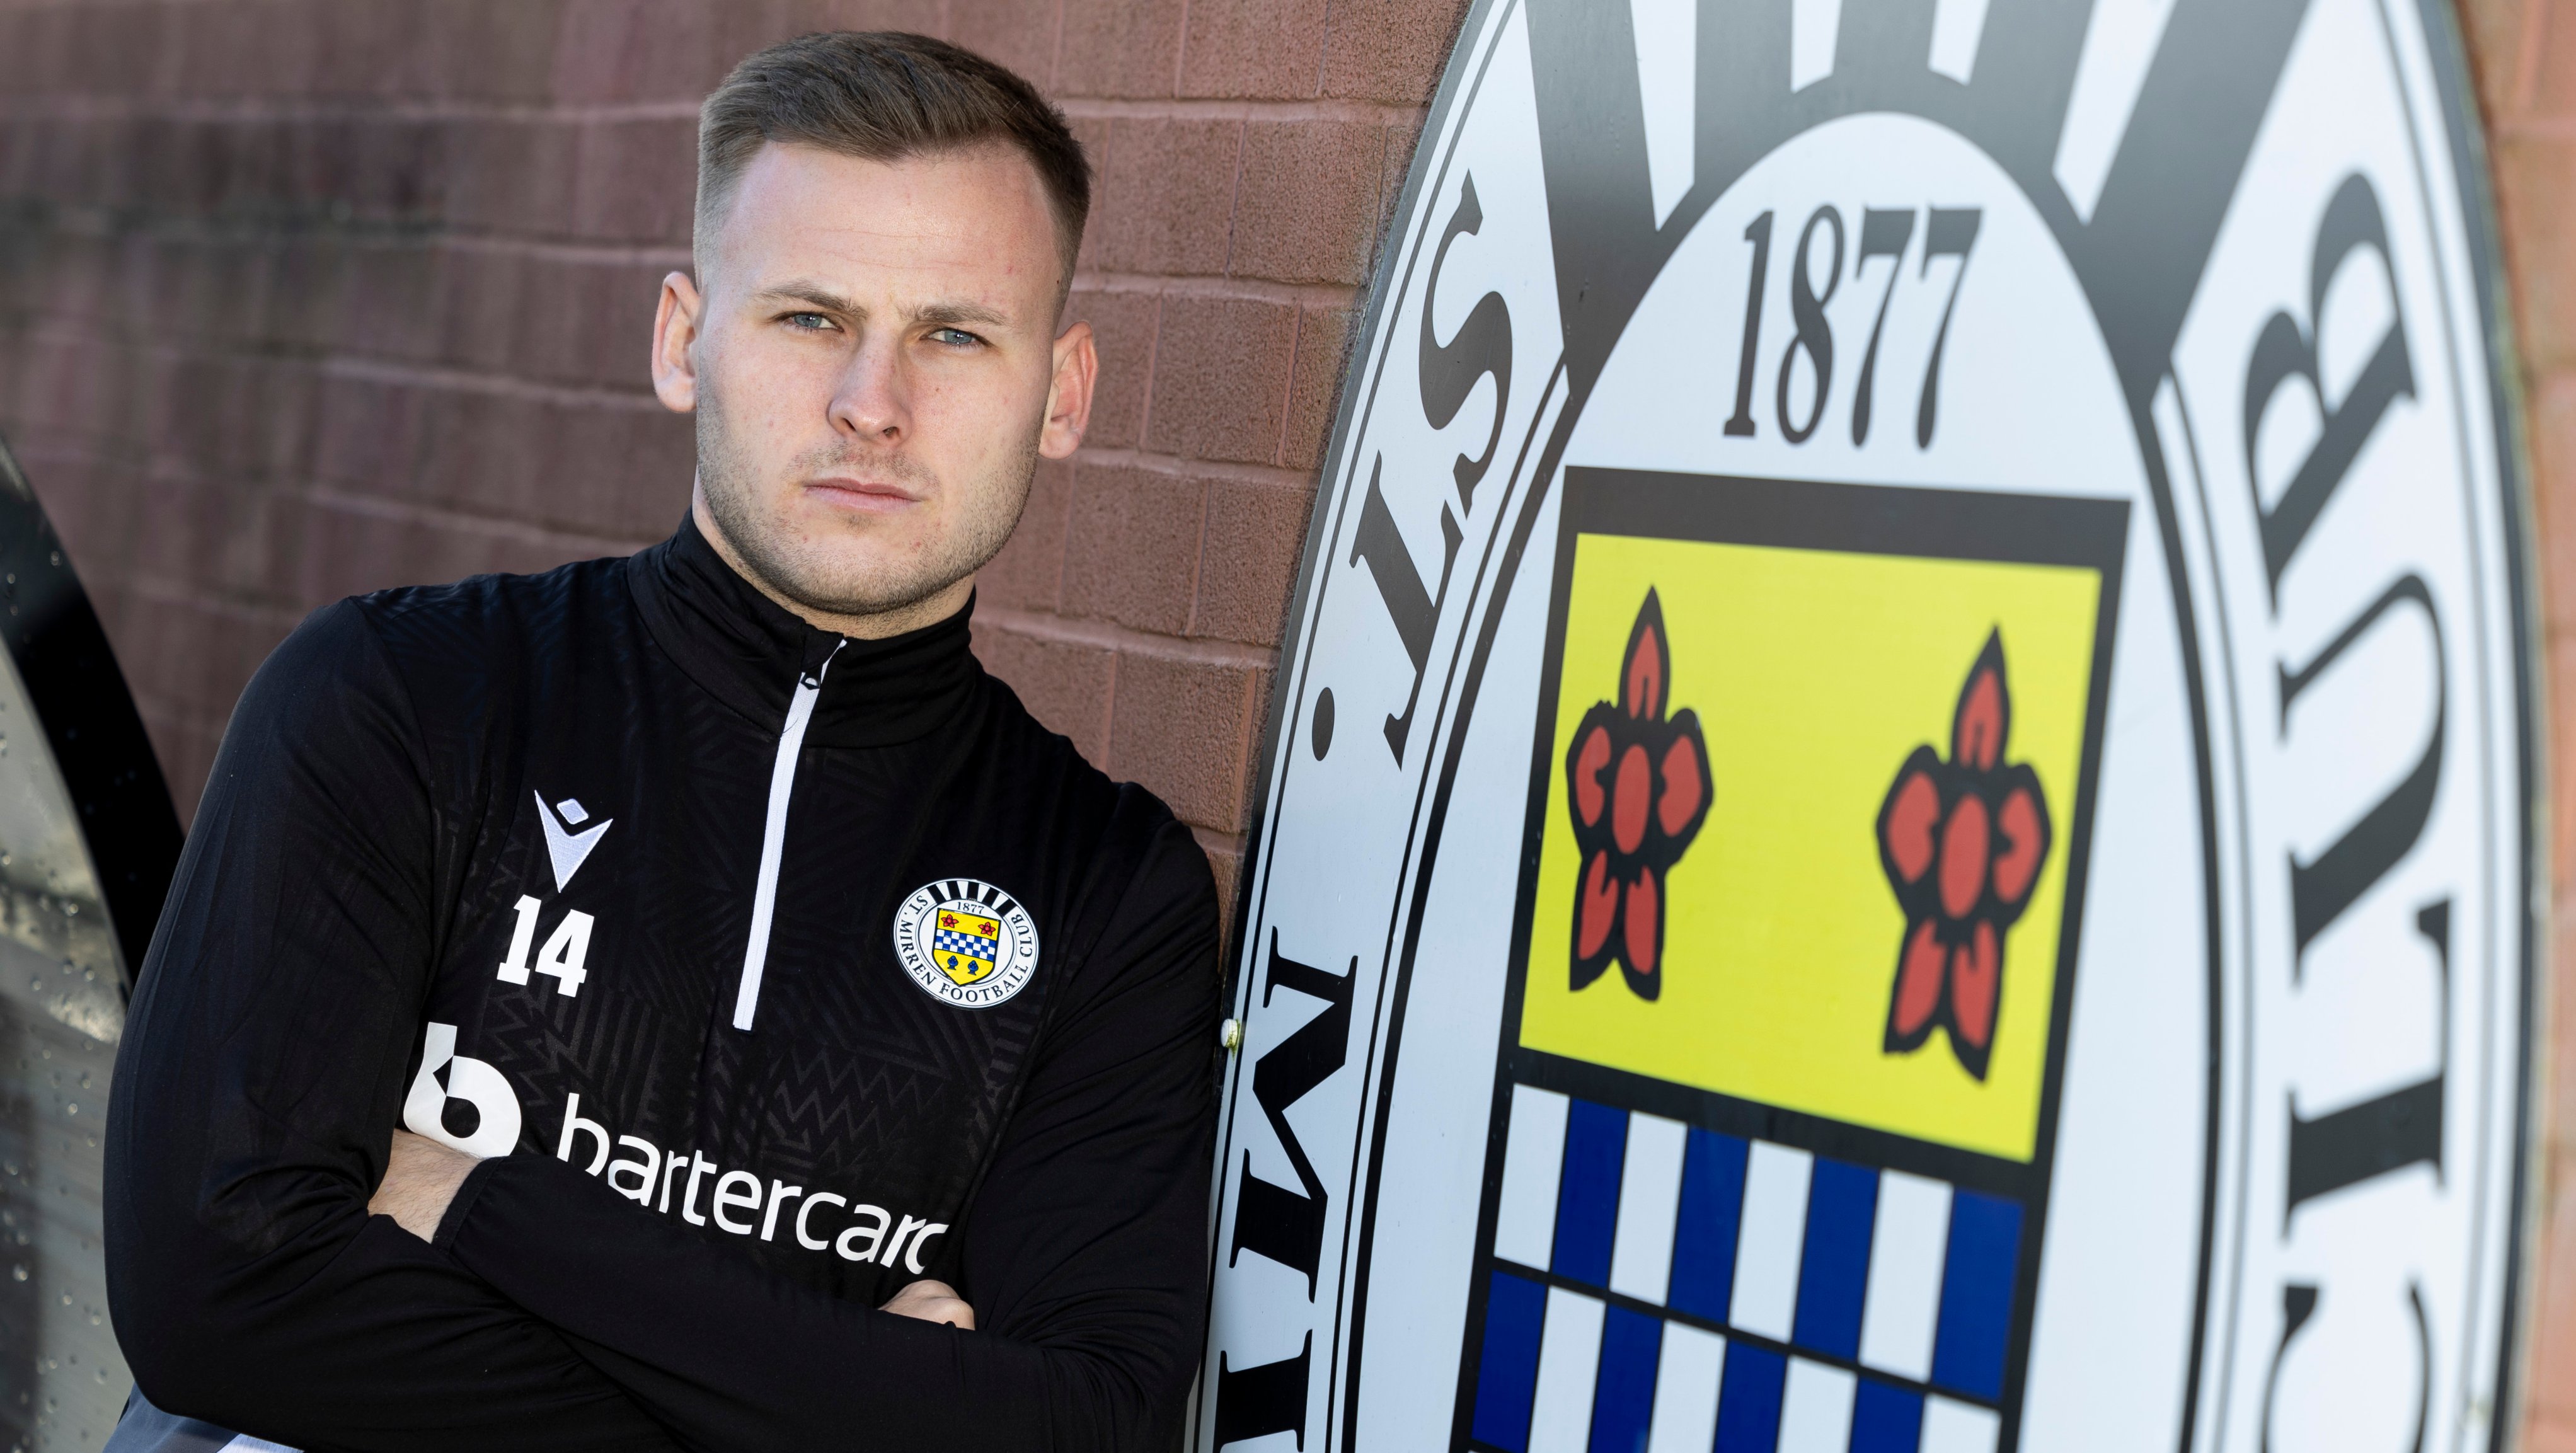 James Scott is looking forward to getting back on track at St Mirren. (Photo by SNS Group)